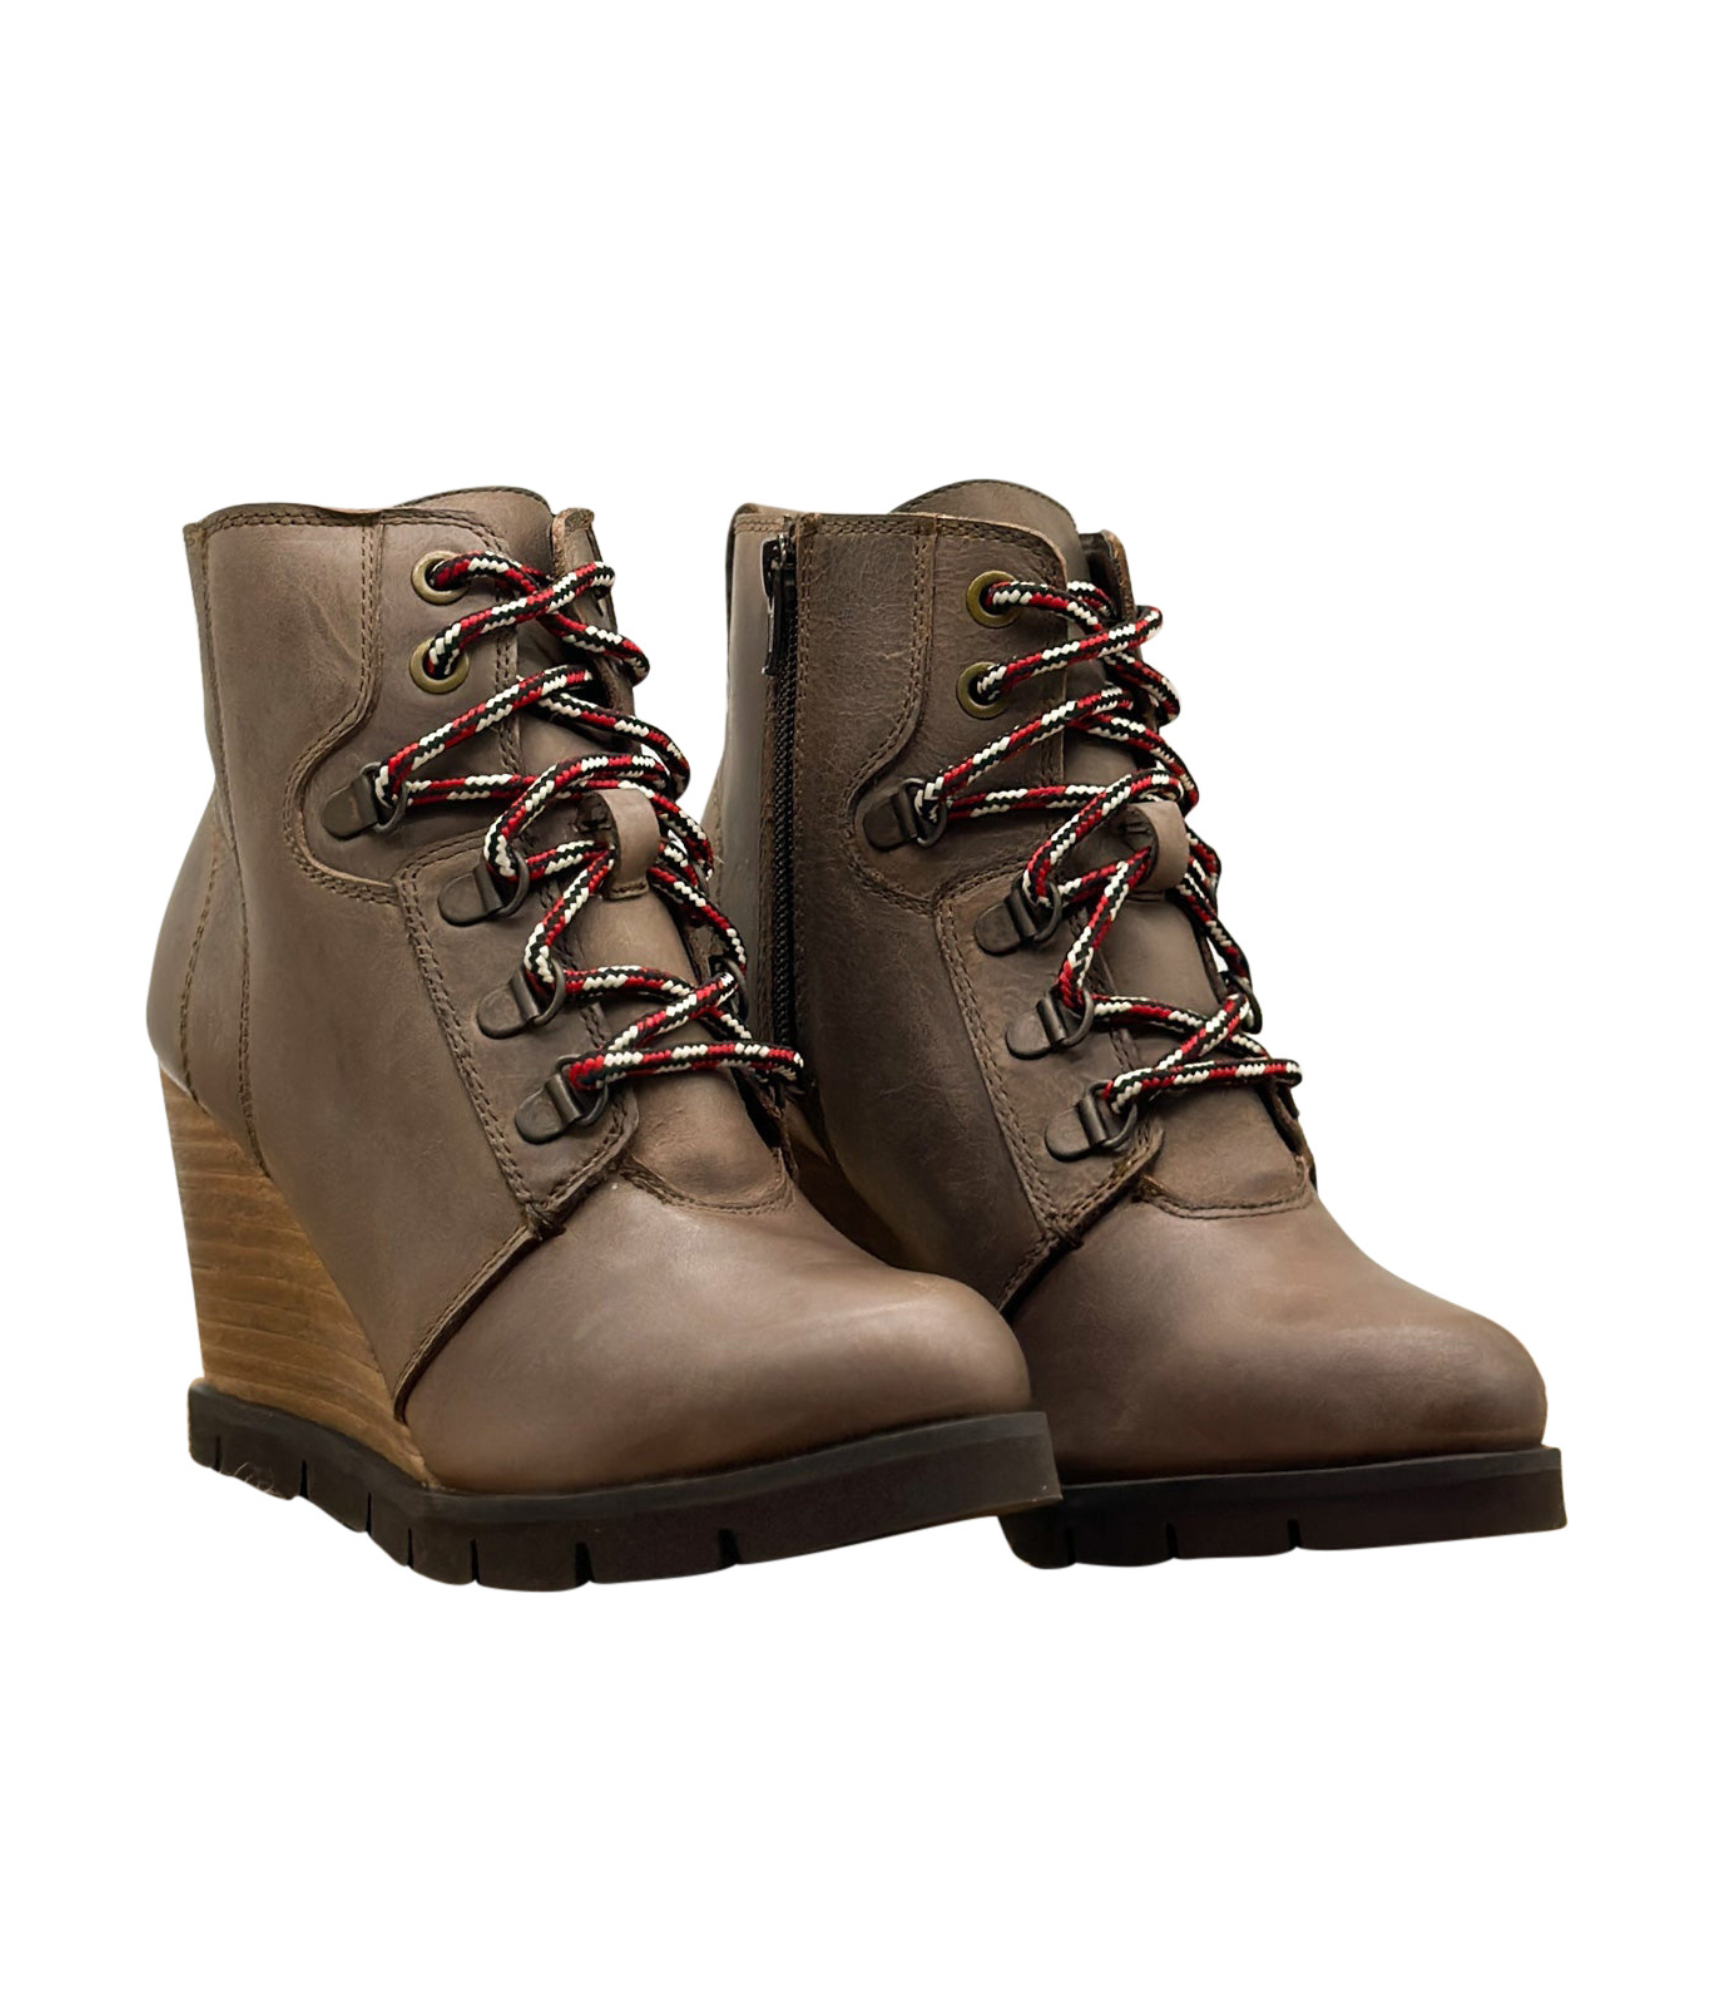 Joana Boot in Taupe